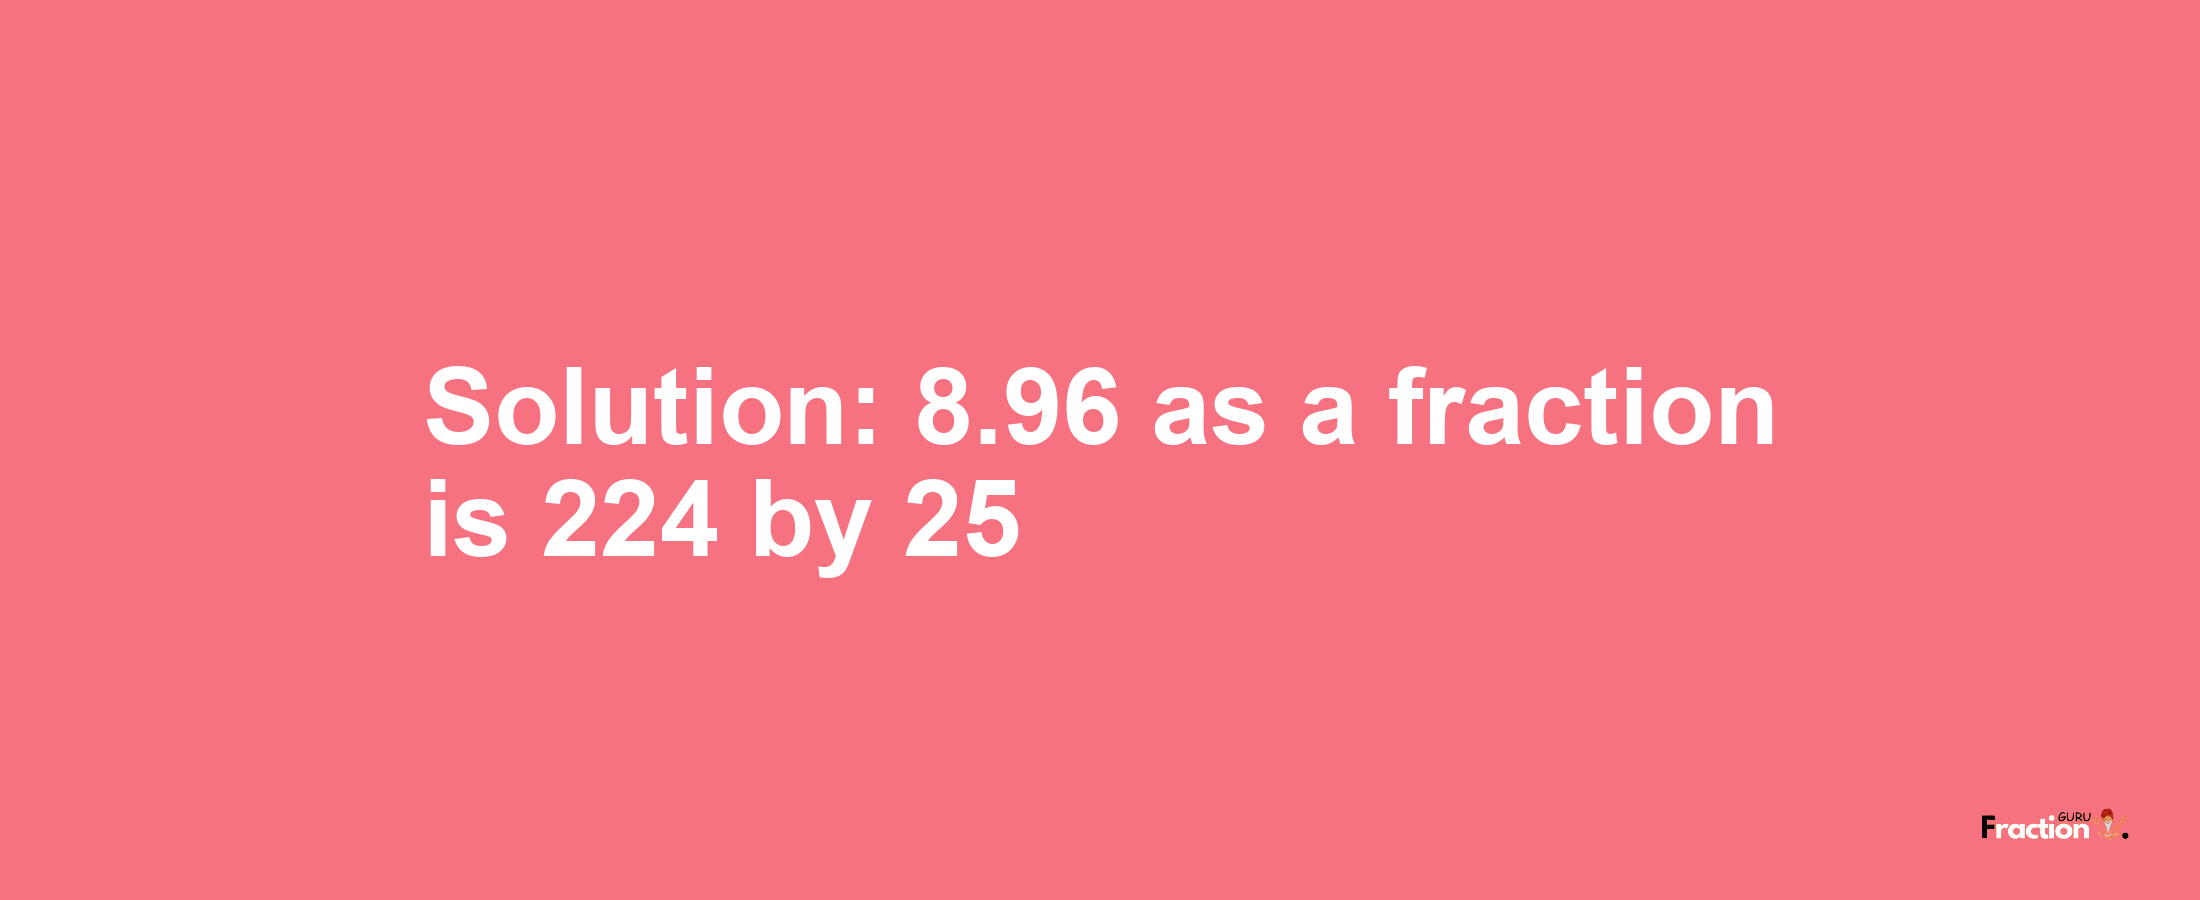 Solution:8.96 as a fraction is 224/25